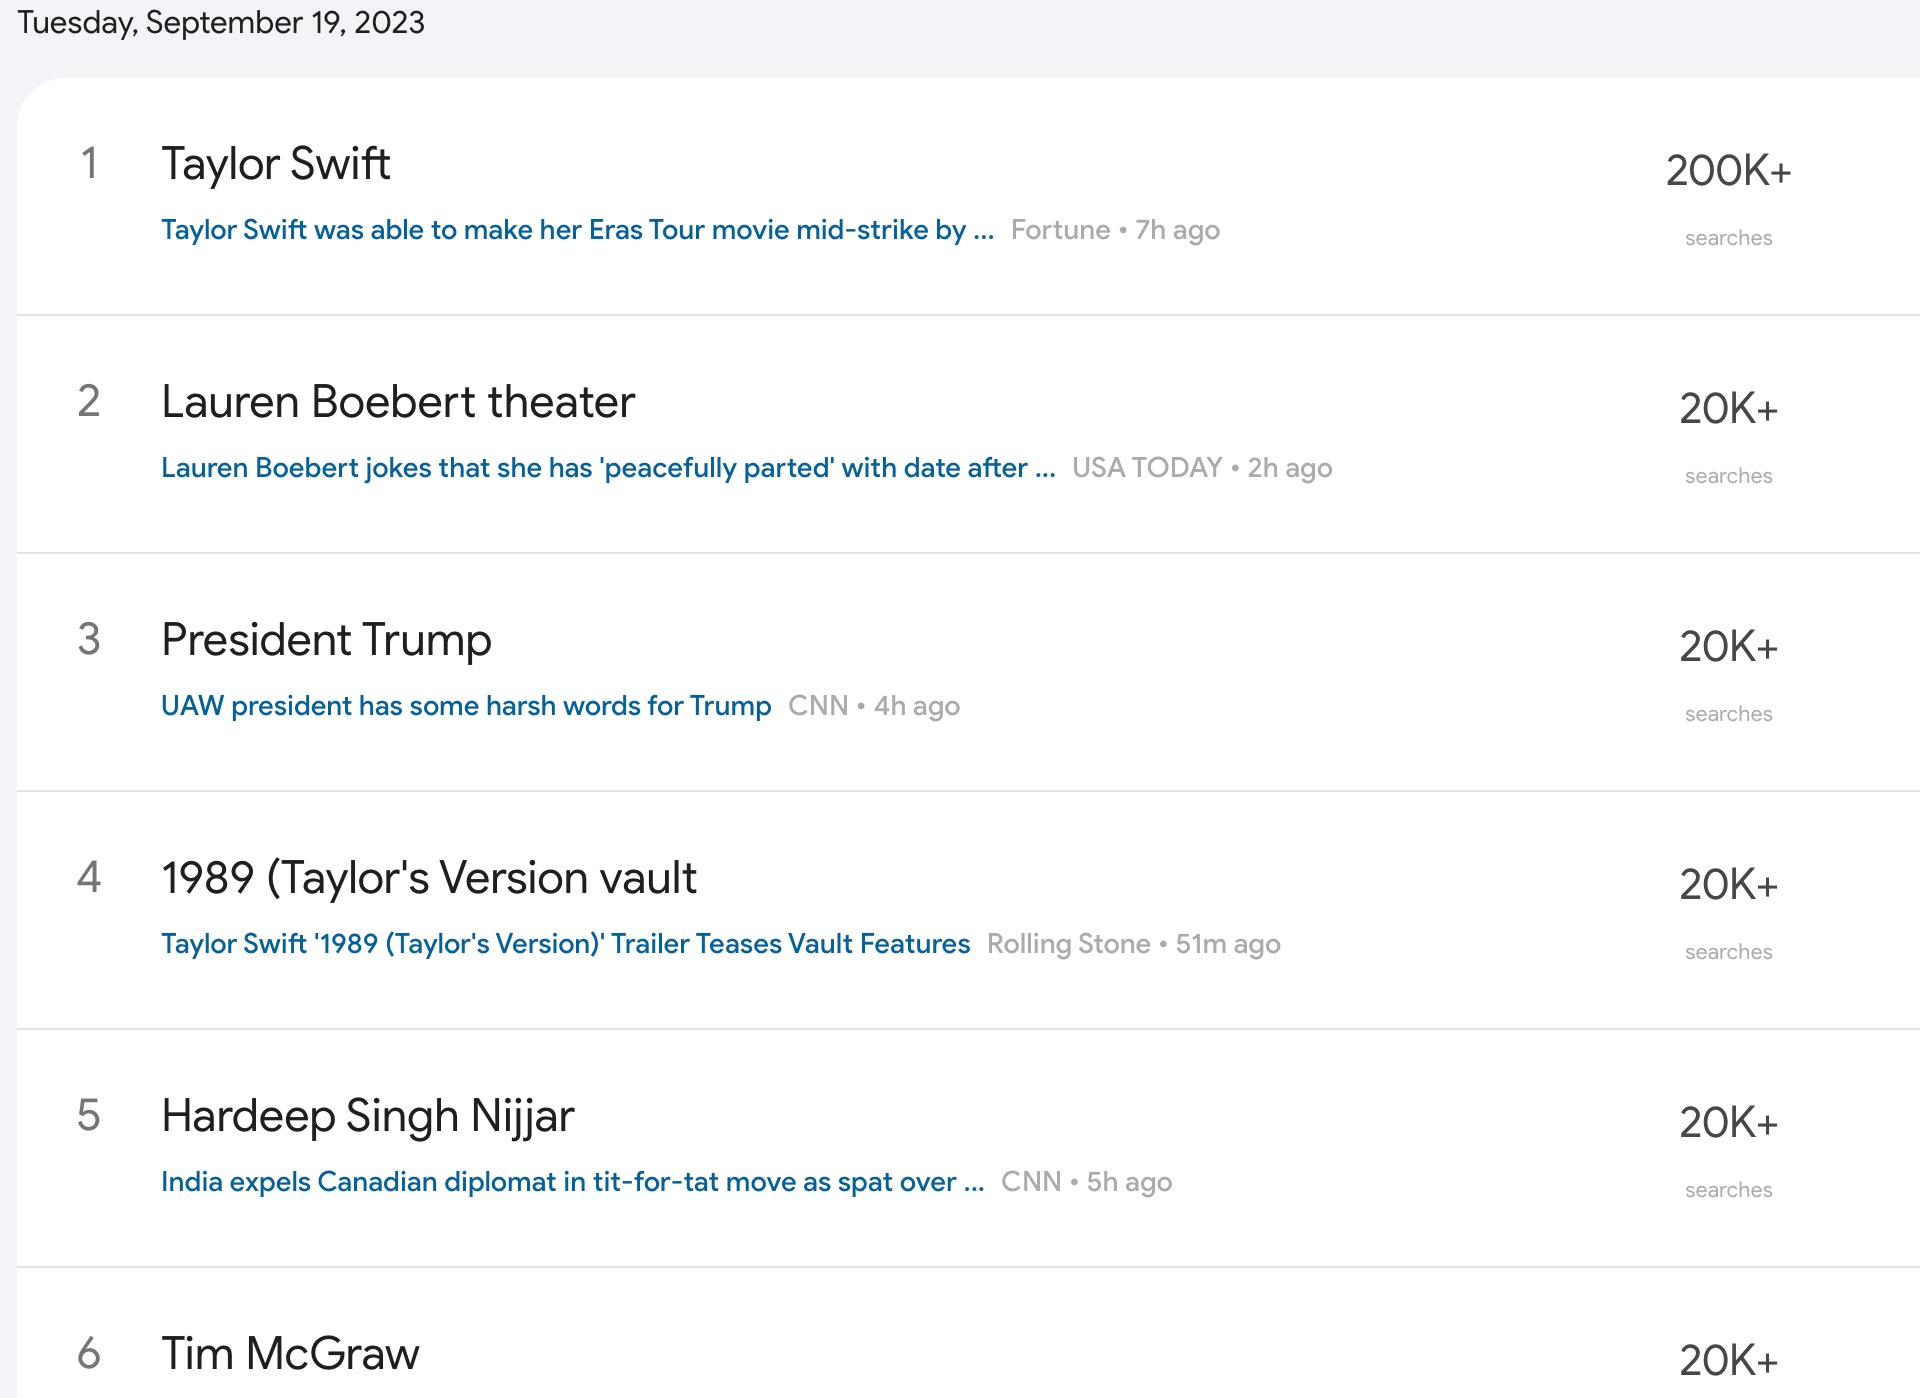 Taylor Swift search trends